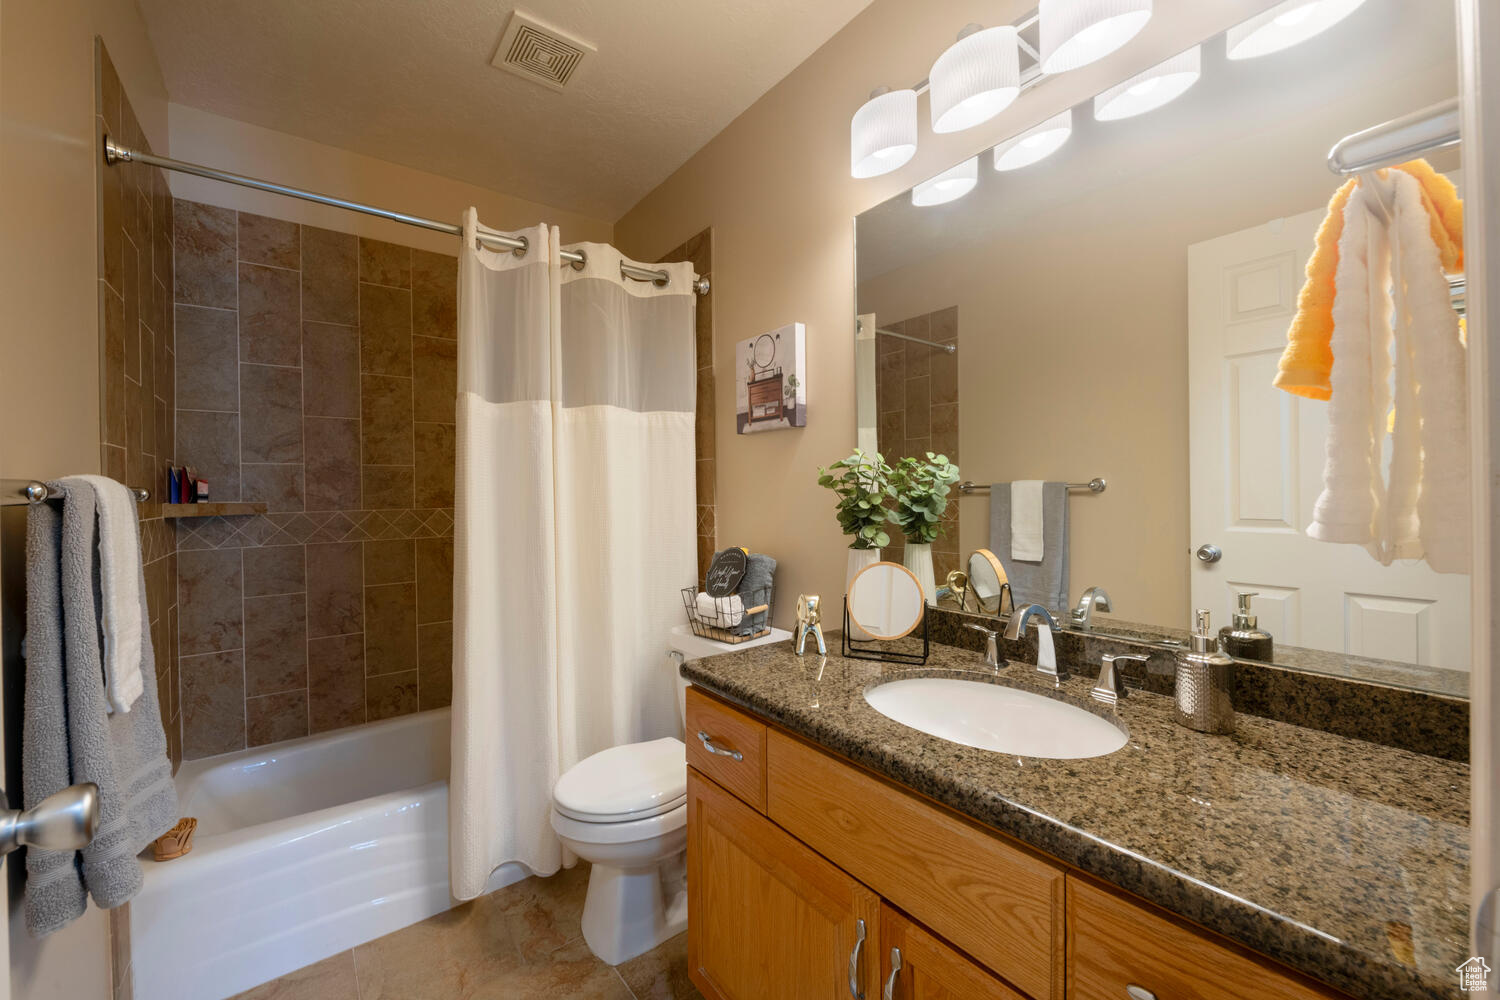 Mail full bathroom with tile surround and flooring, and granite vanity